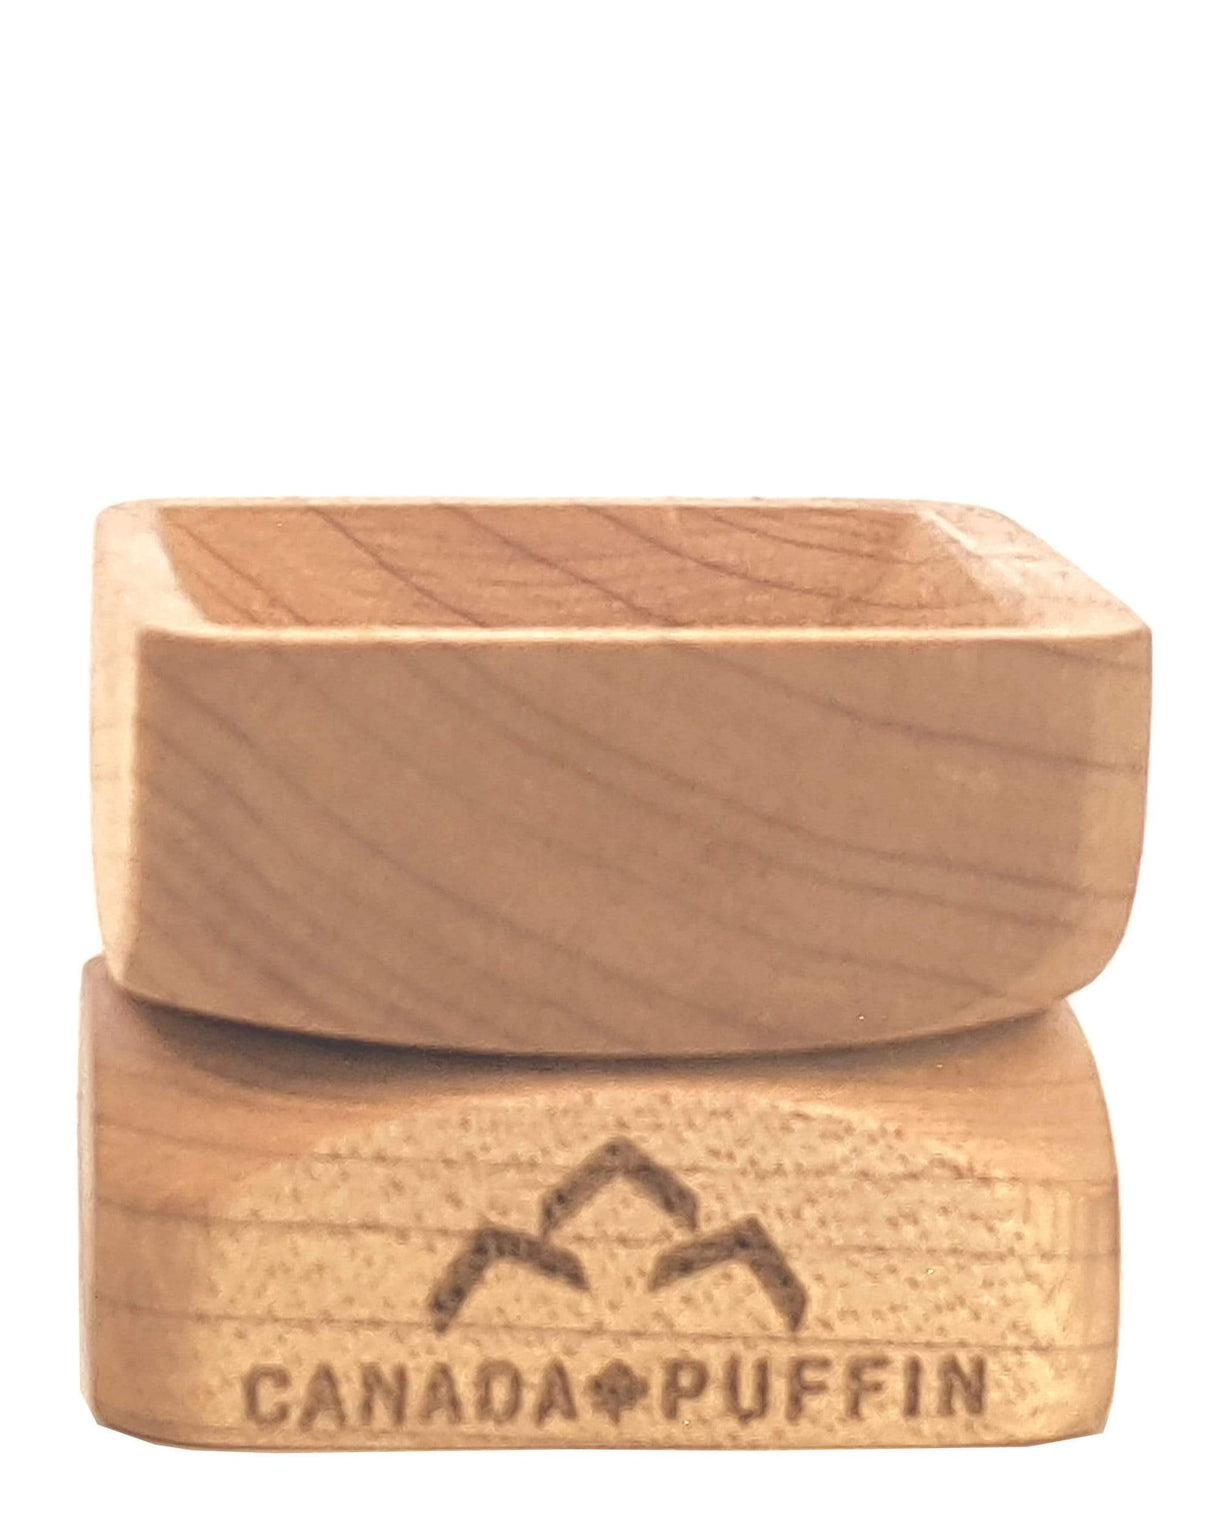 Canada Puffin Parklands Wooden Grinder for Dry Herbs, 2-Part, Front View on White Background